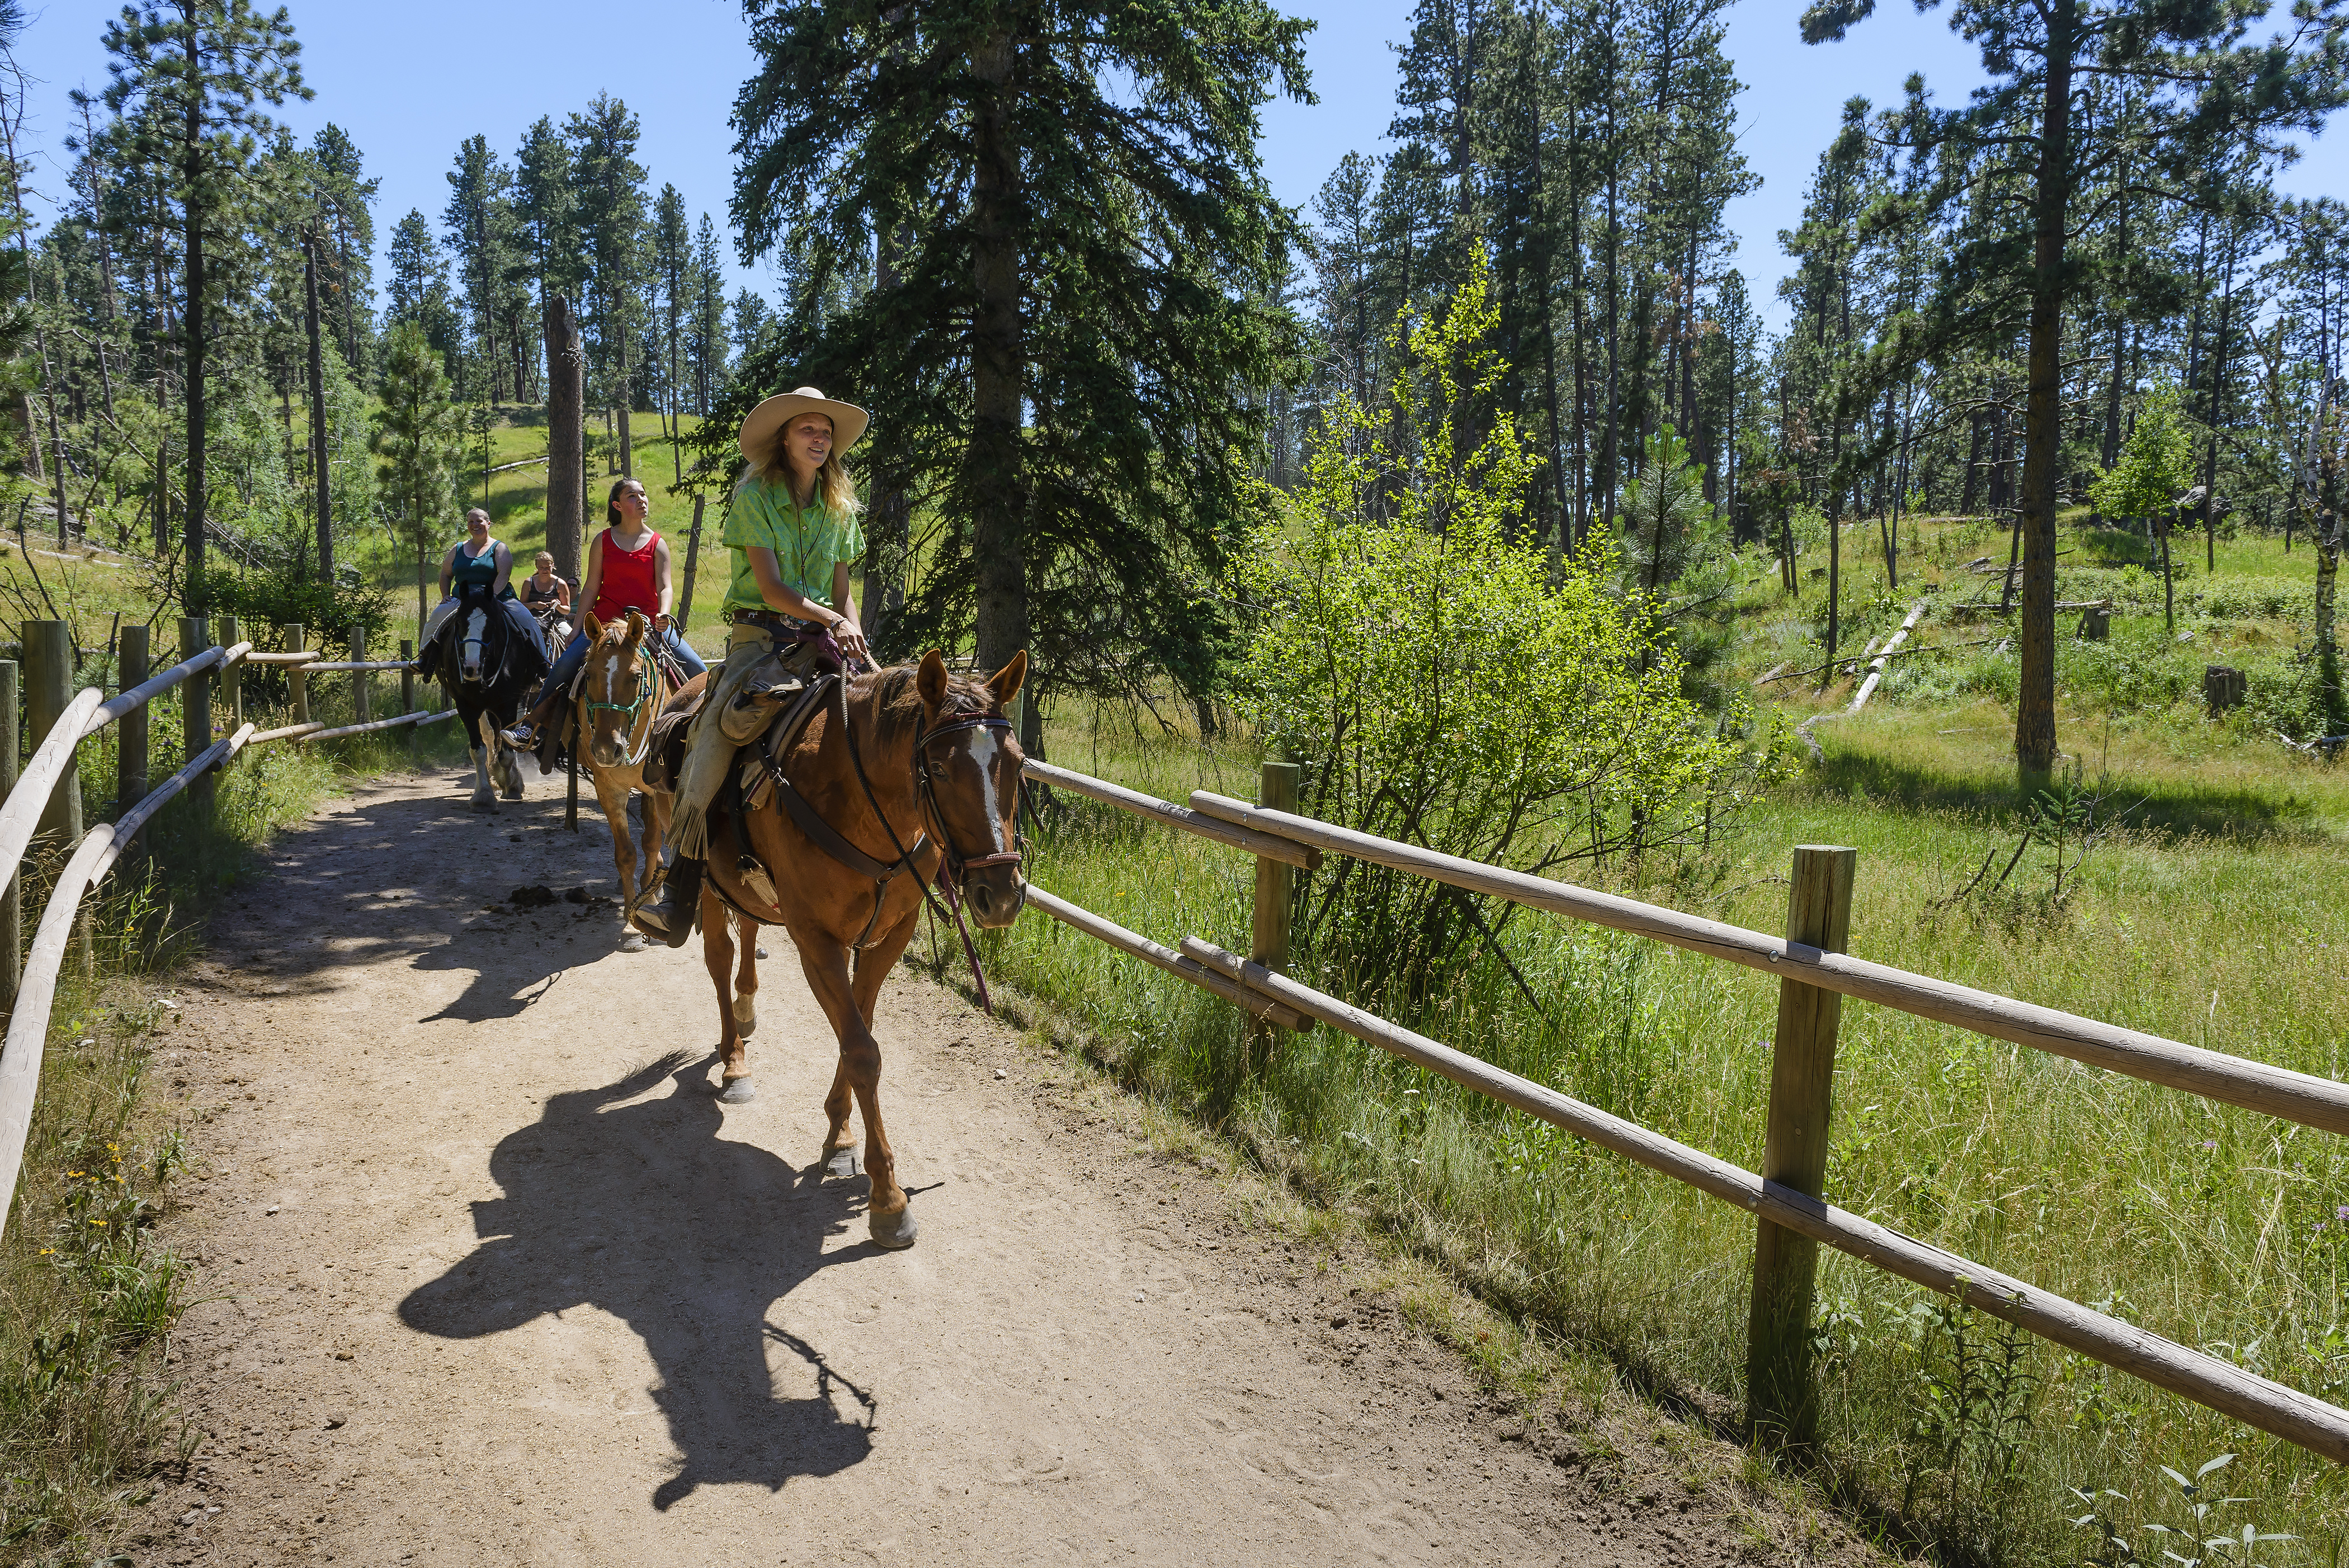 Trail, Wagon Rides & Horse Camps